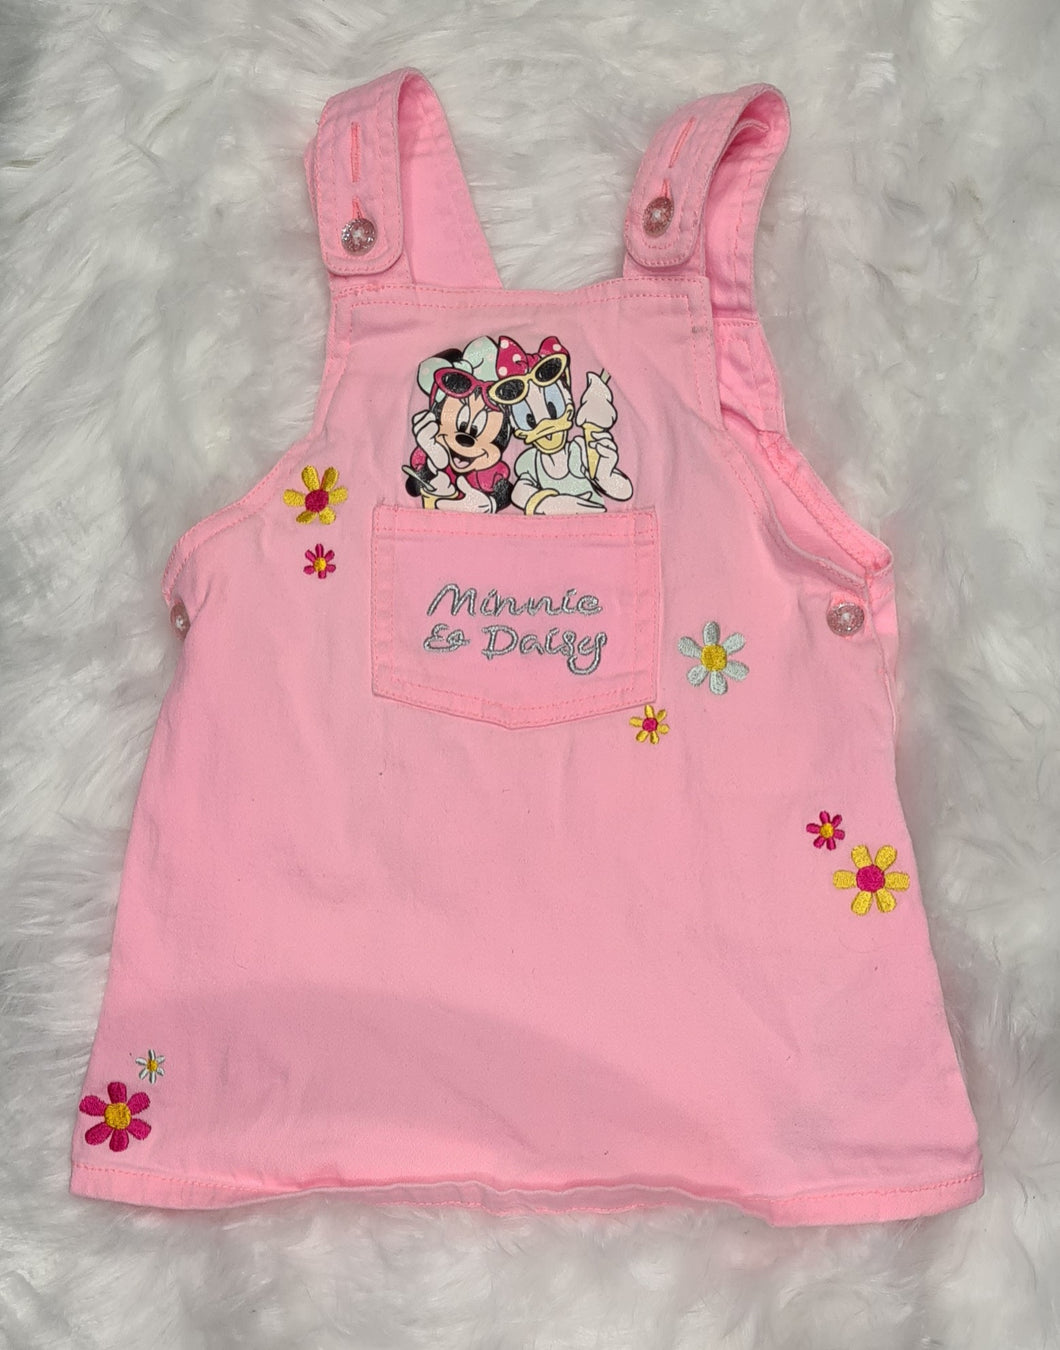 Girls 6-9 months - Disney/Minnie Mouse and Daisy Duck Dungaree Dress